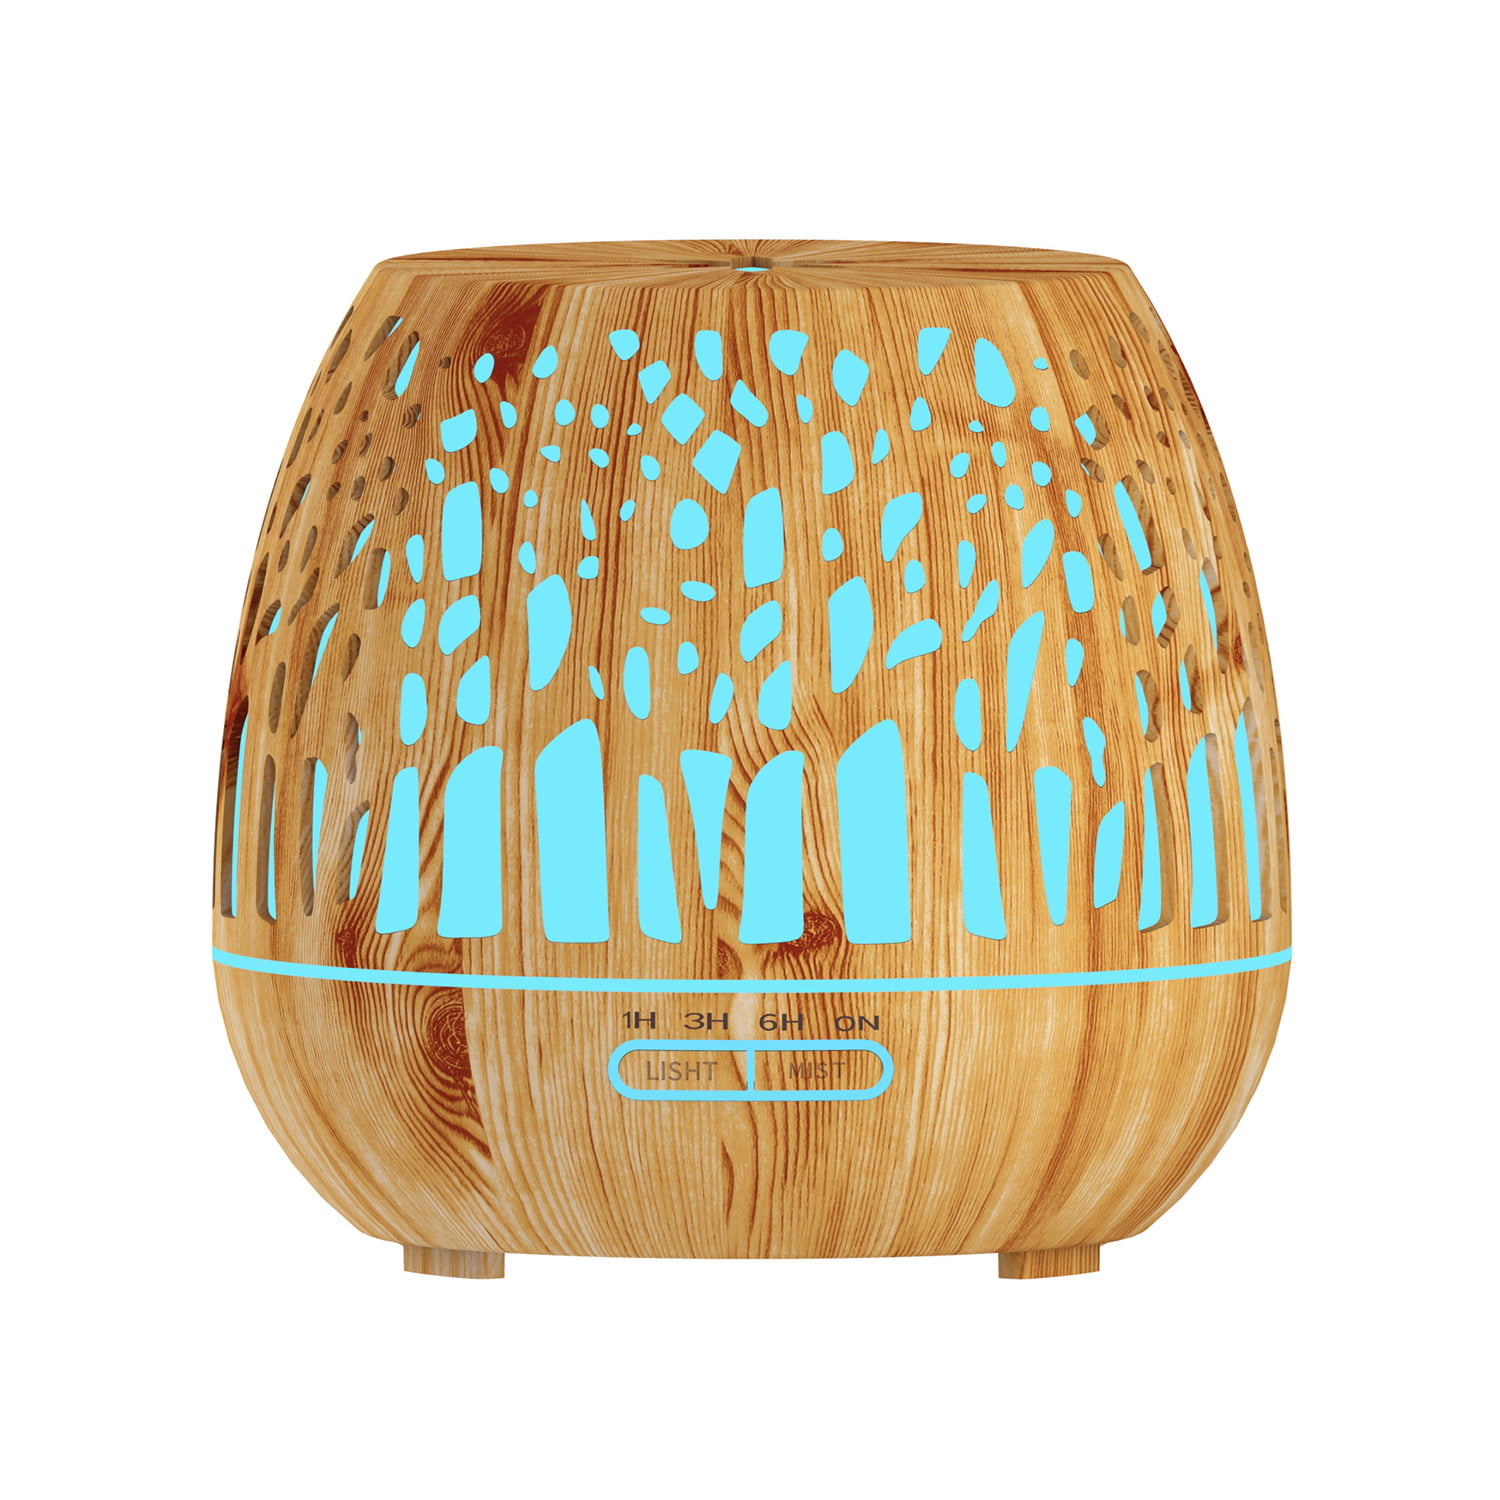 Essential Oils Diffuser 400ml Humidifier Air Purifiers Room Humidifier with 7 Colour Changing LED Lights USB Wood Grain Humidifier for Office Home Bedroom Yoga Spa 